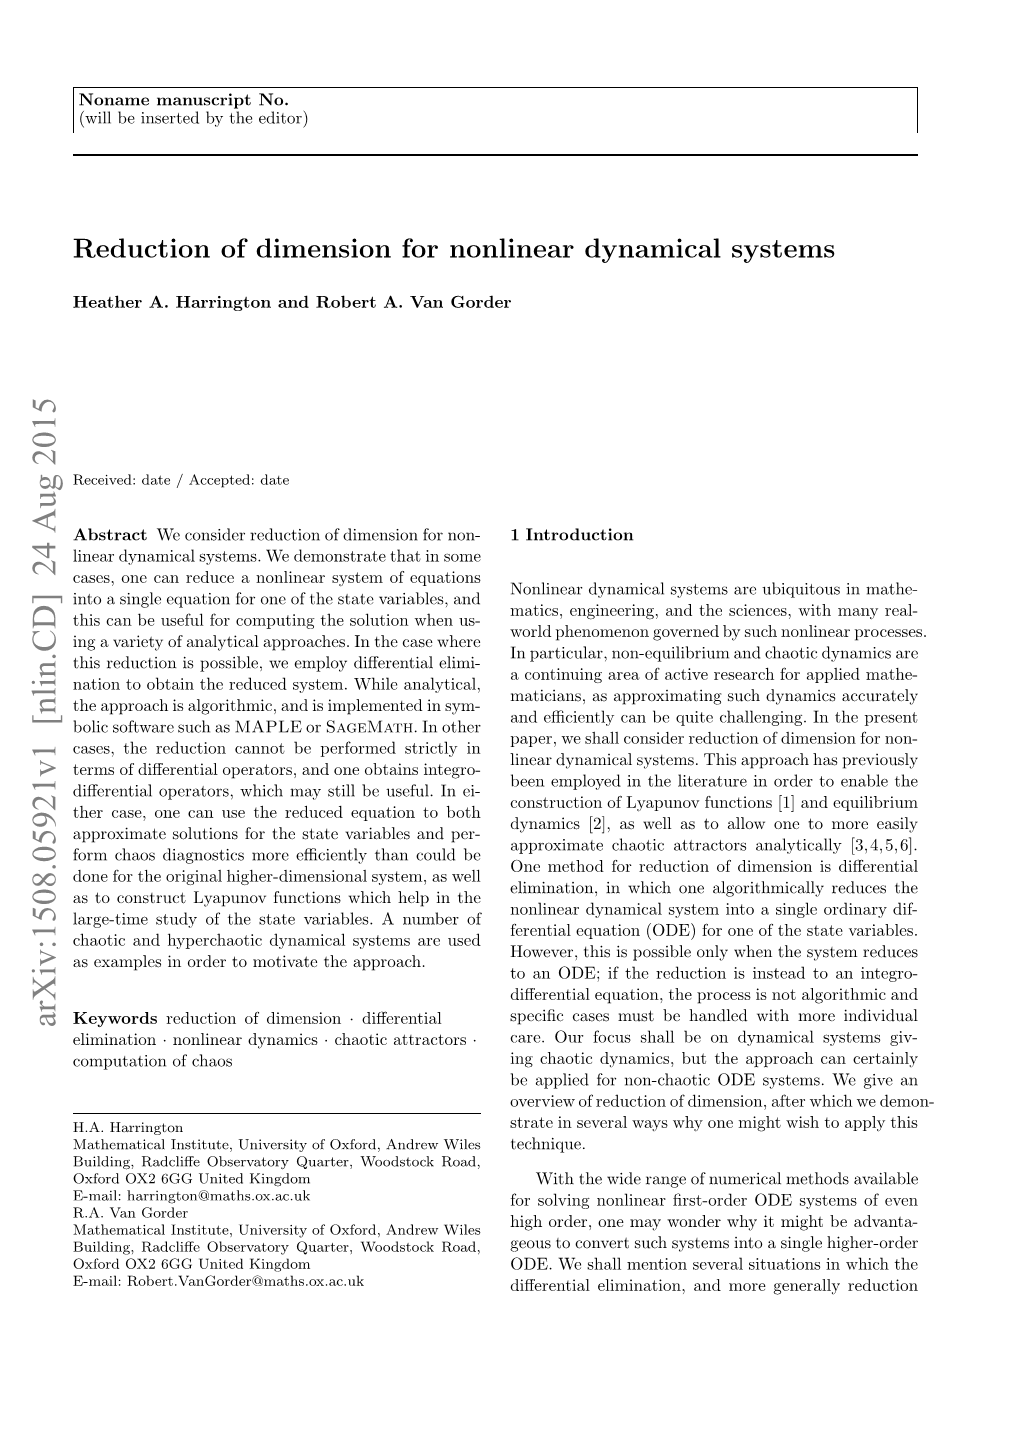 Reduction of Dimension for Nonlinear Dynamical Systems 3 Equations for the Reduced State Variable